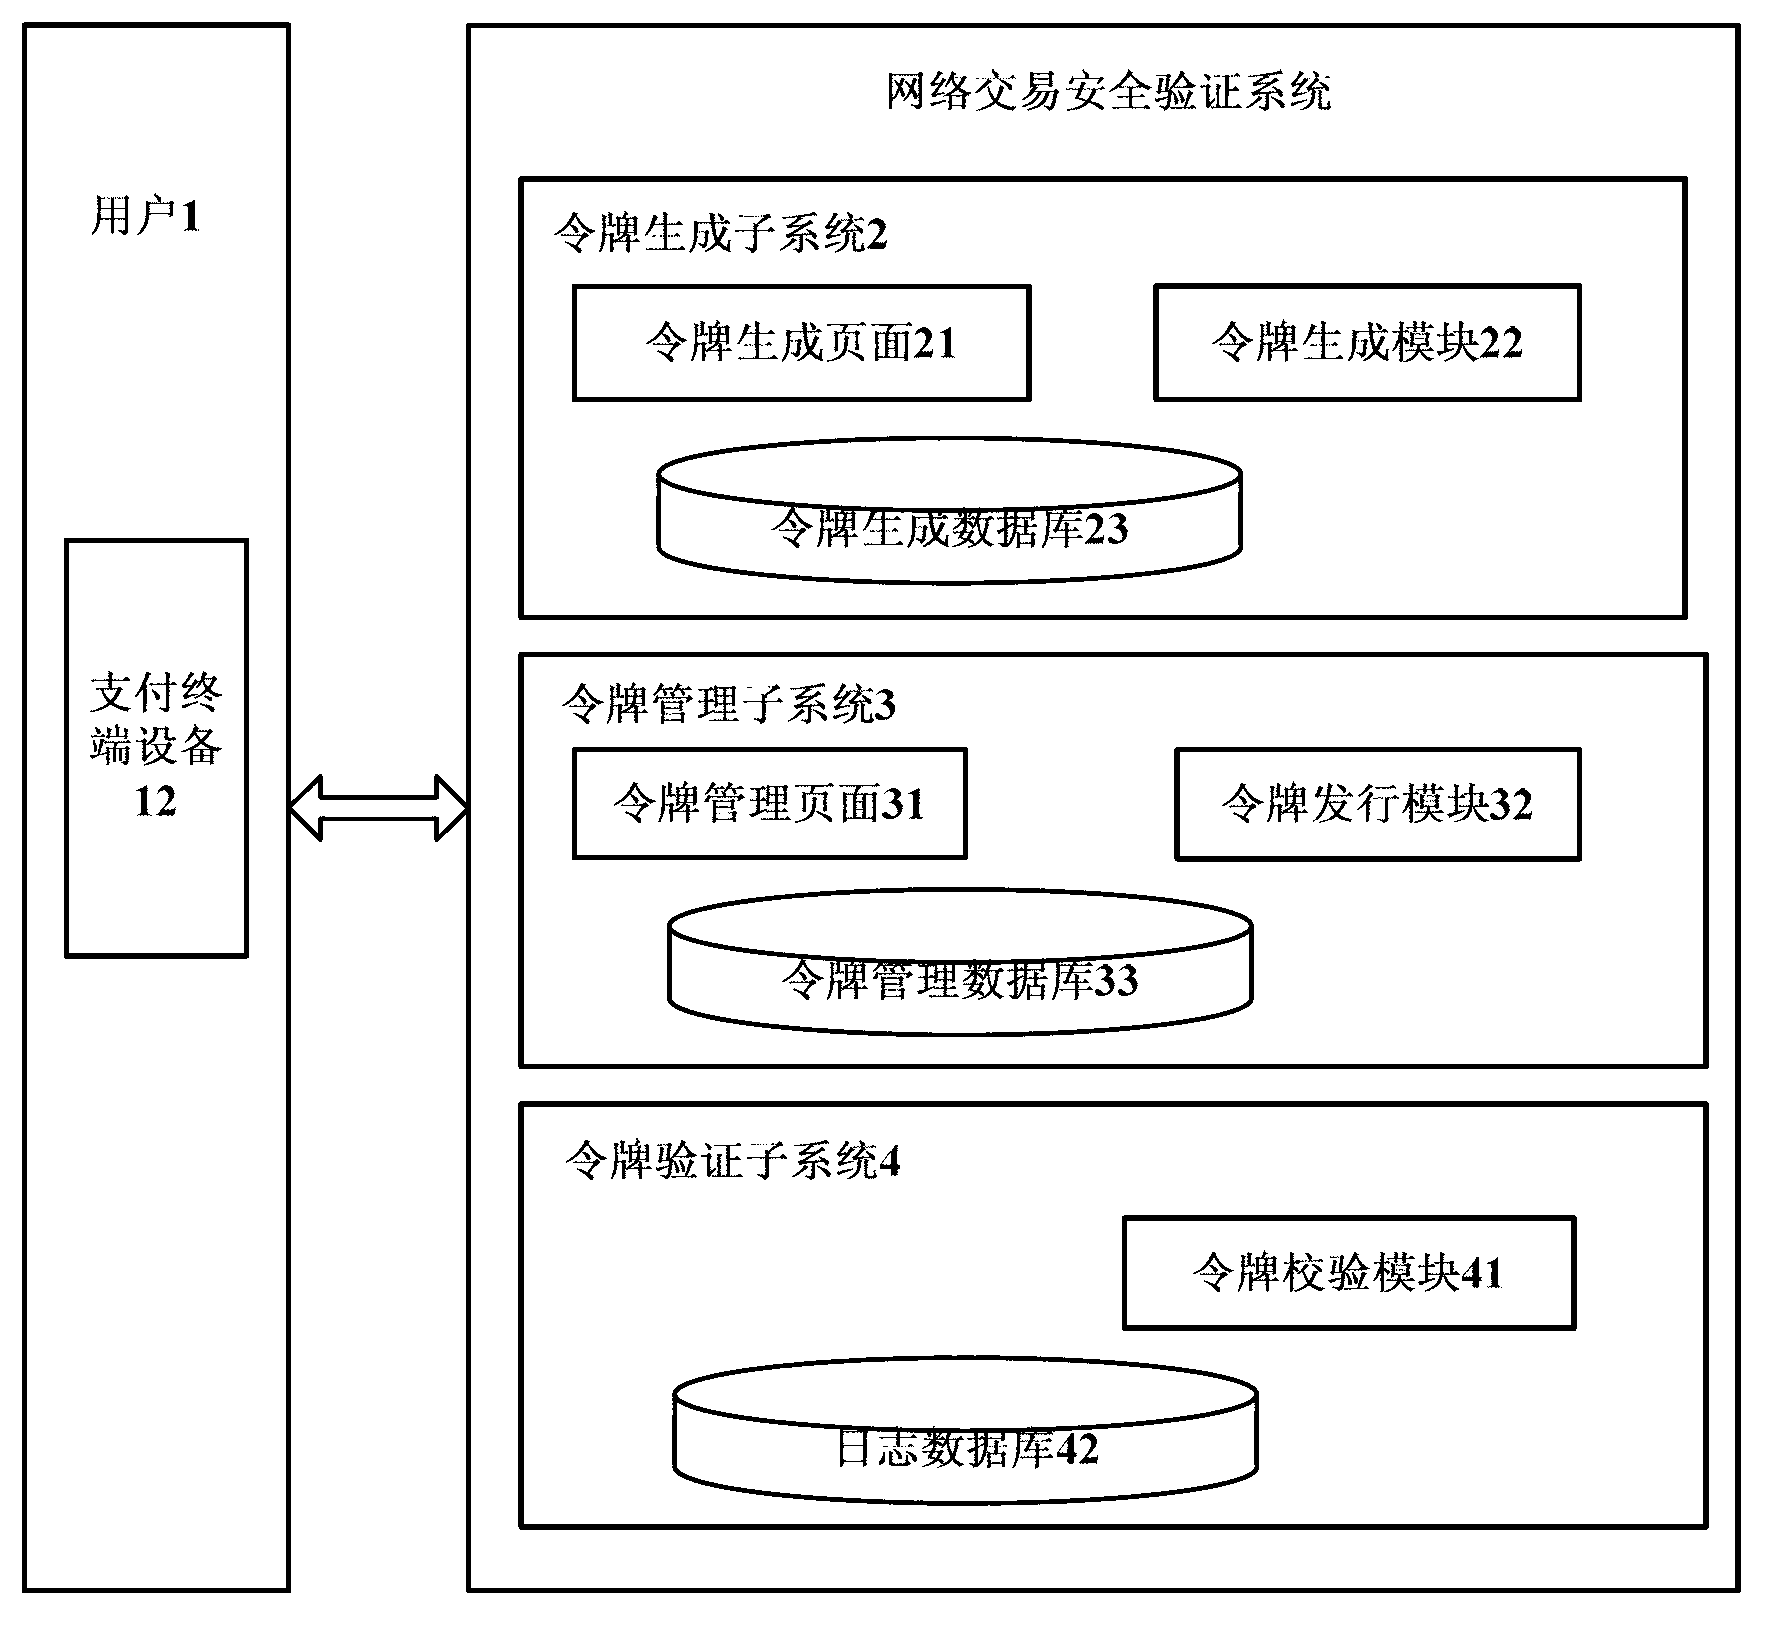 Security verification system based on distributed network transaction